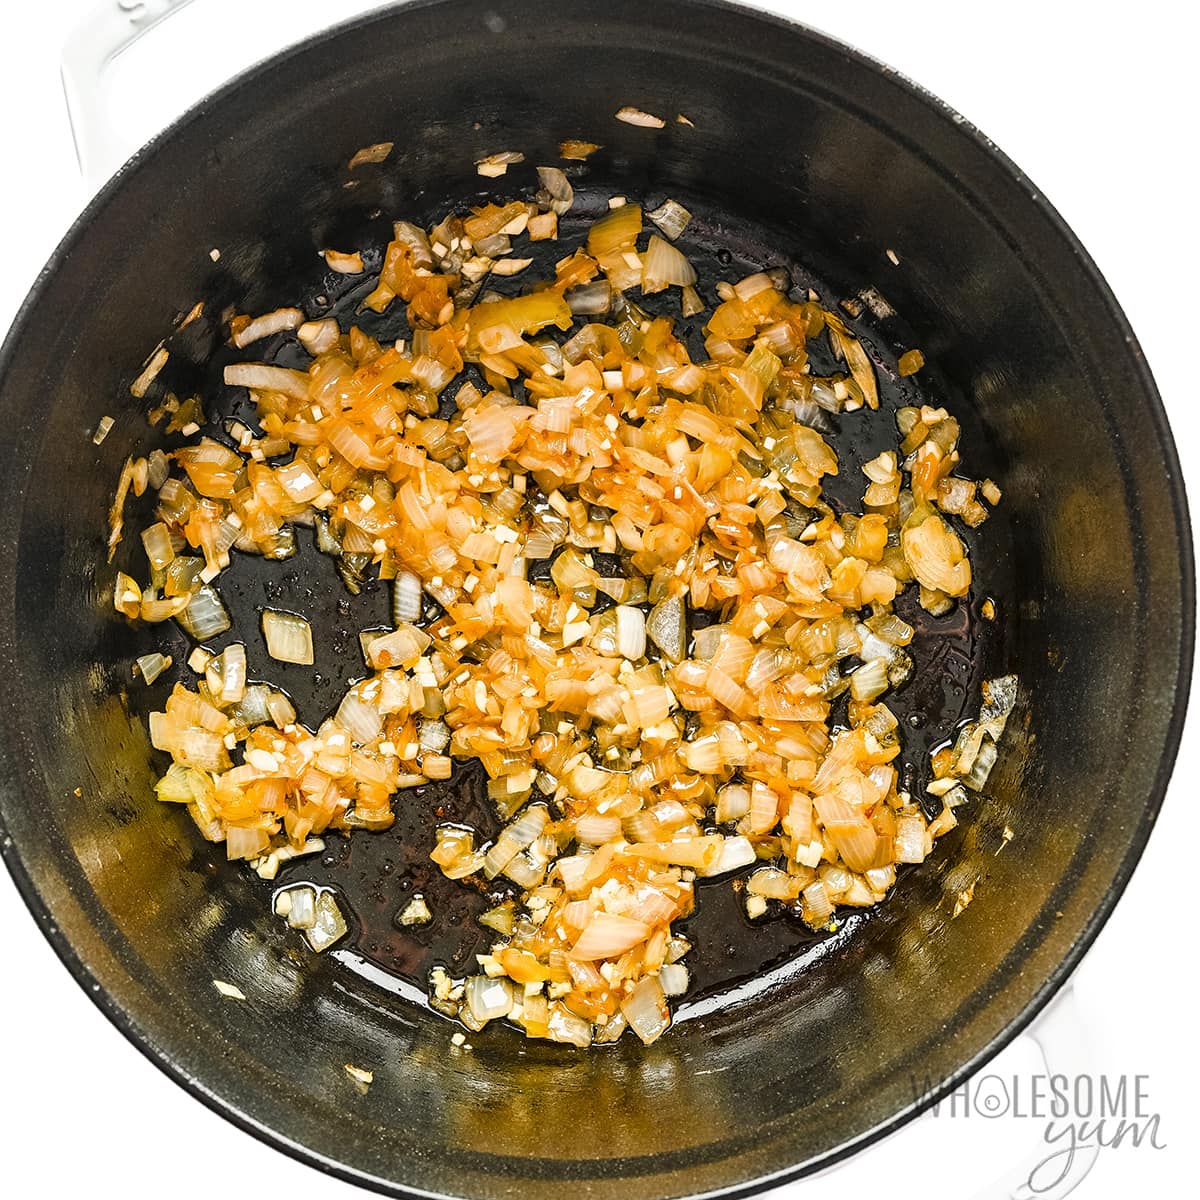 Garlic and onion sauteed in a skillet.